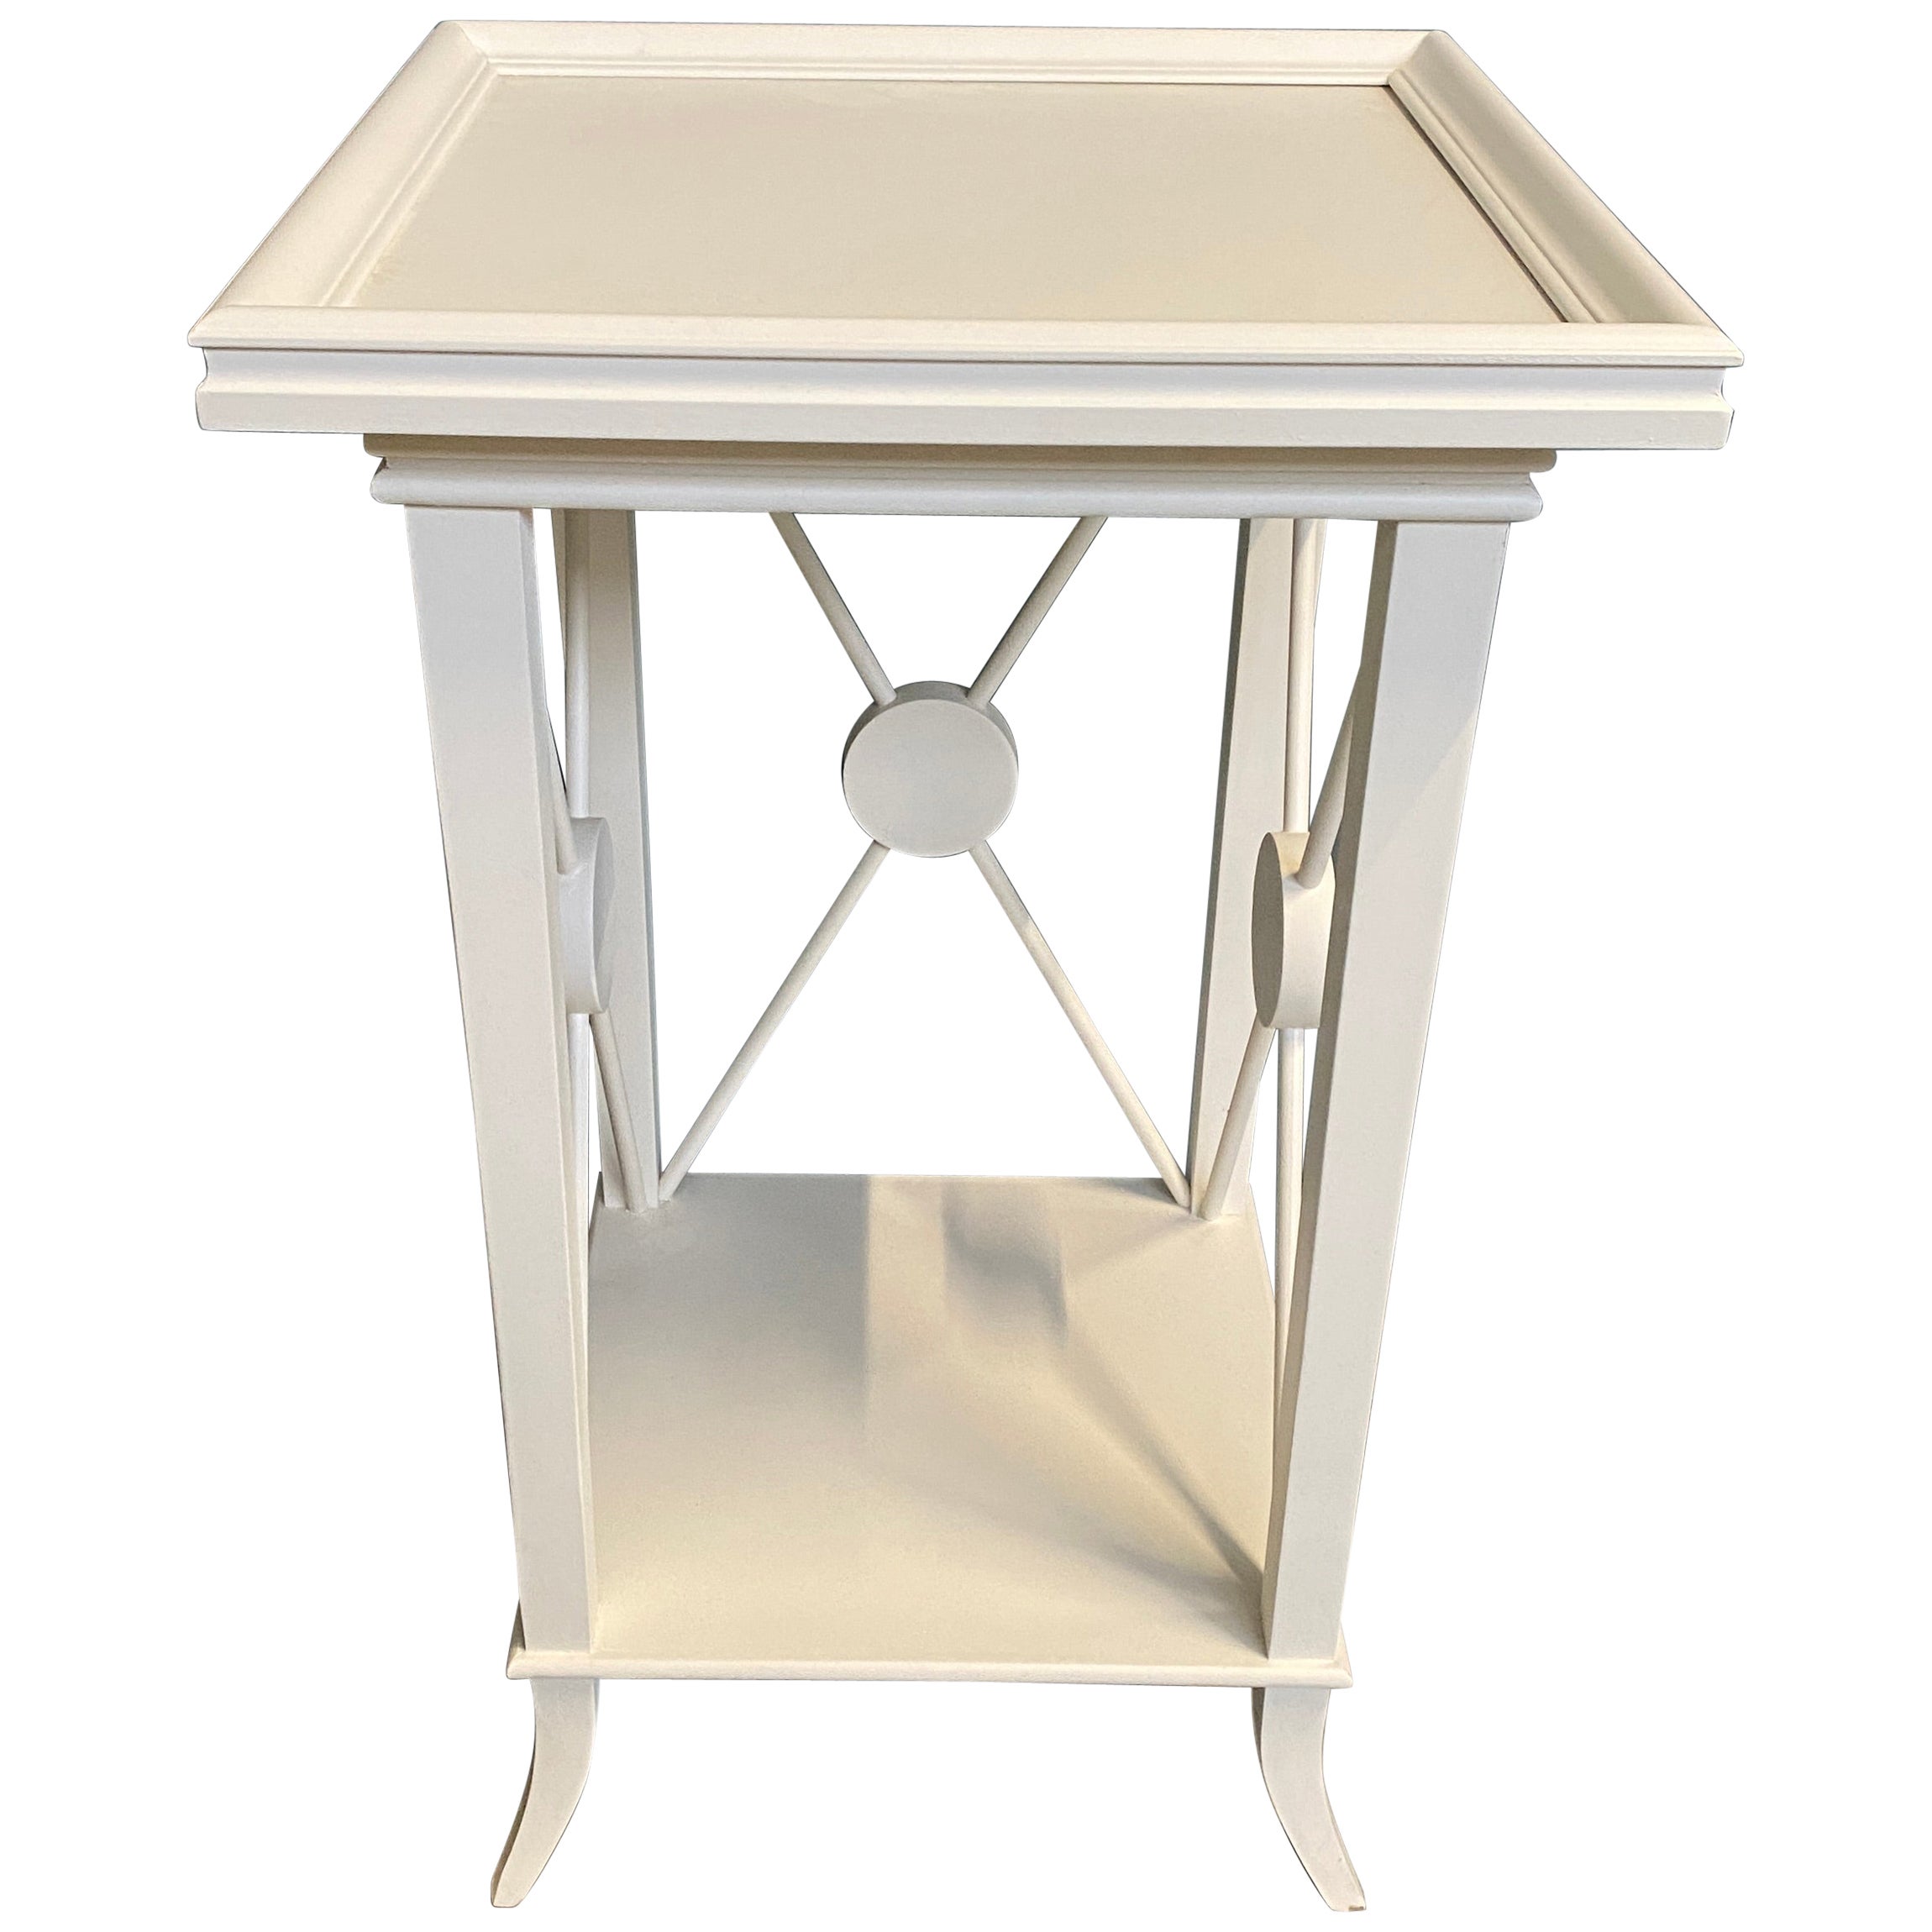 Italian Contemporary  White Lacquered Wood Side Table with Wood Finishes For Sale